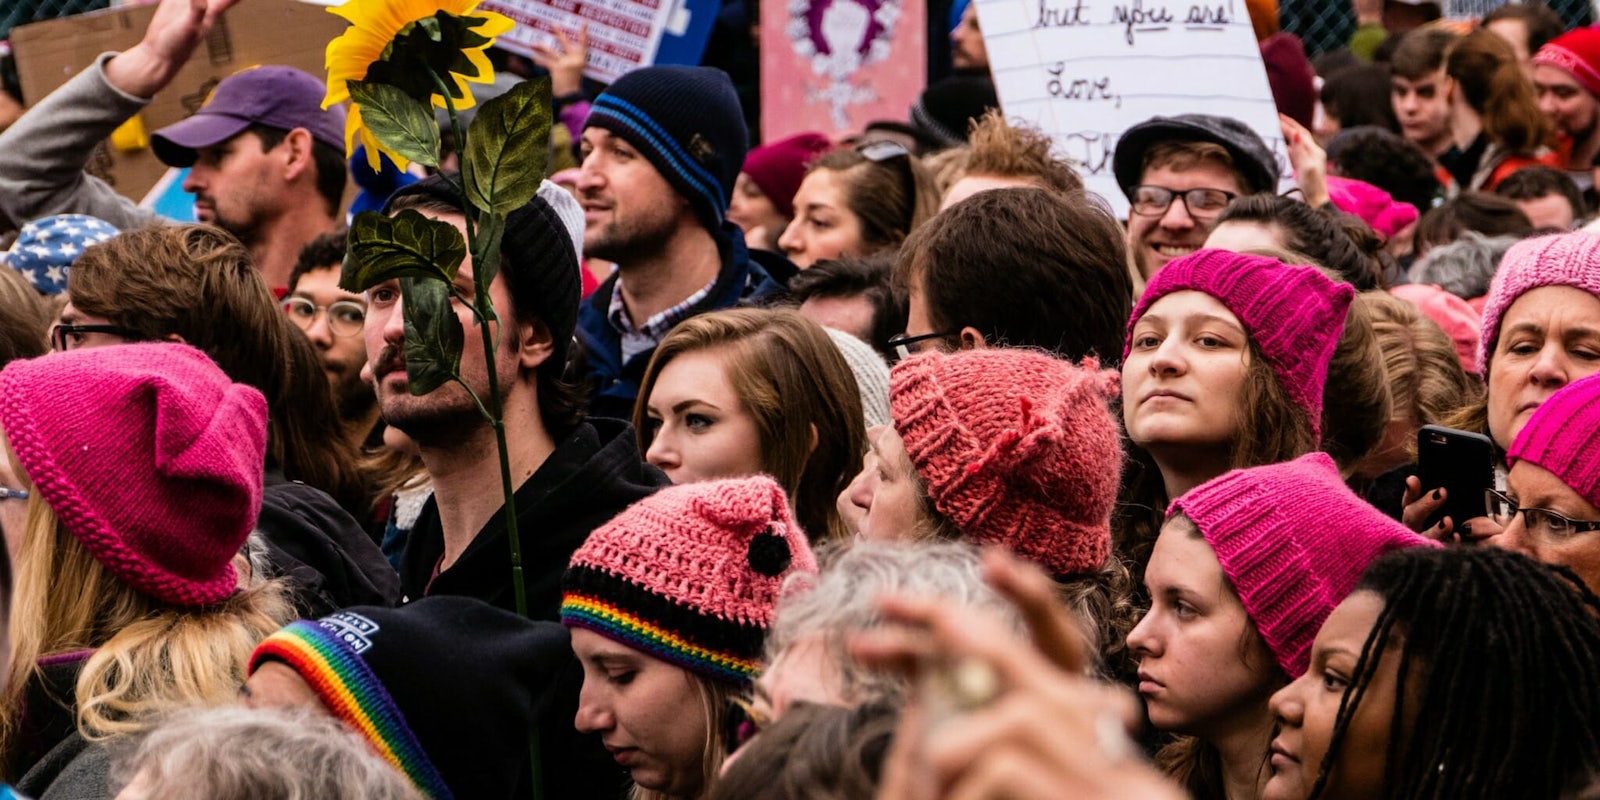 Women's March on Washington participants in 2017.